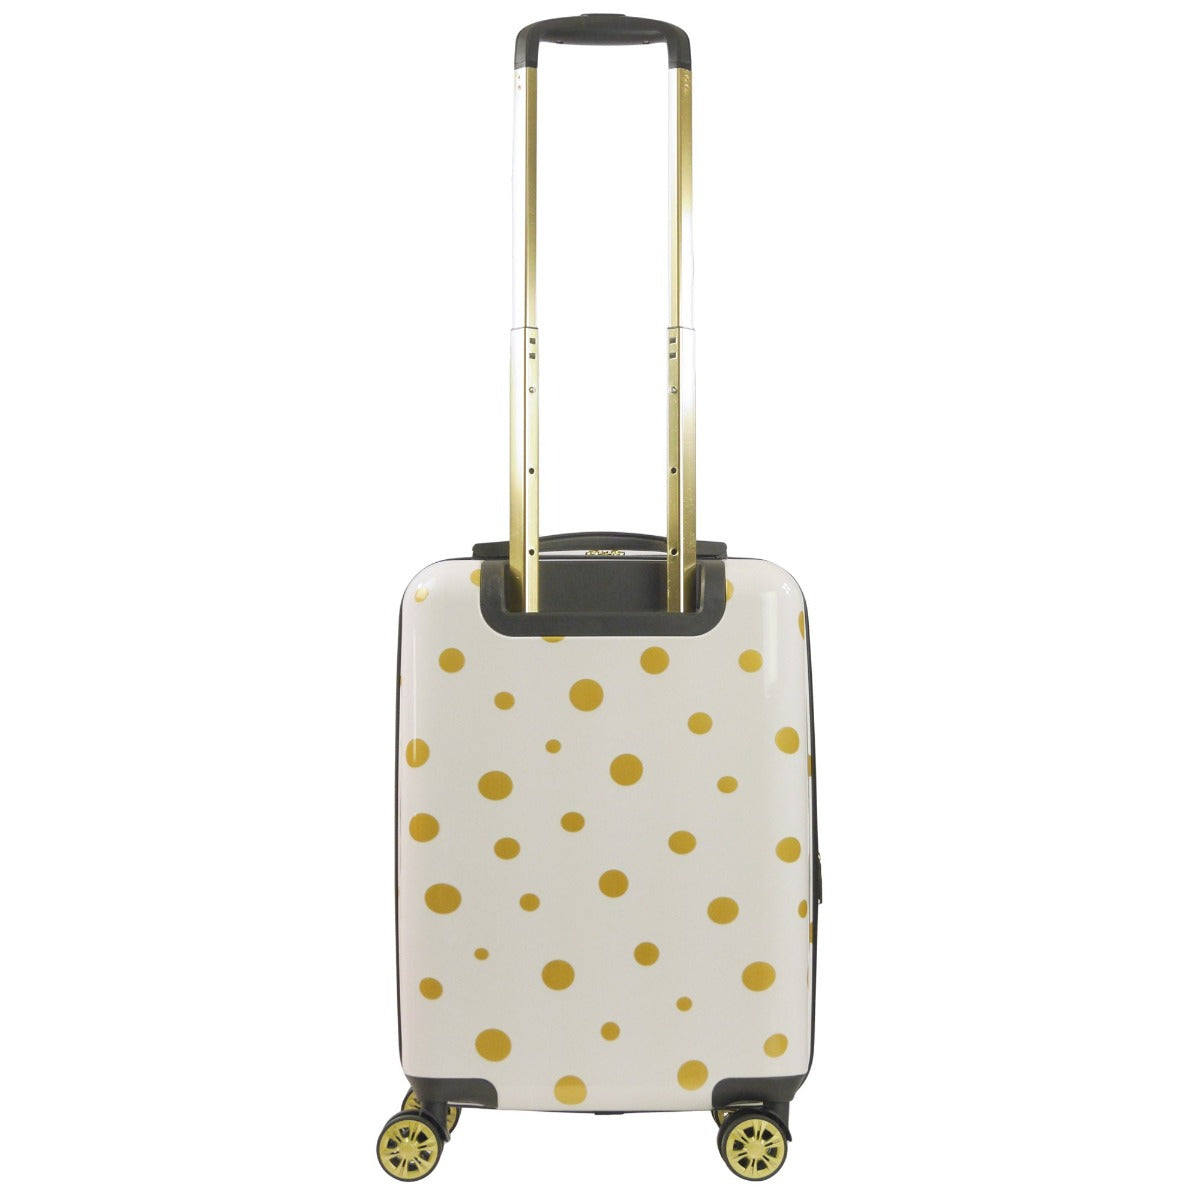 Ful Impulse Mixed Dots hardside spinner 22" carry-on luggage white gold suitcase